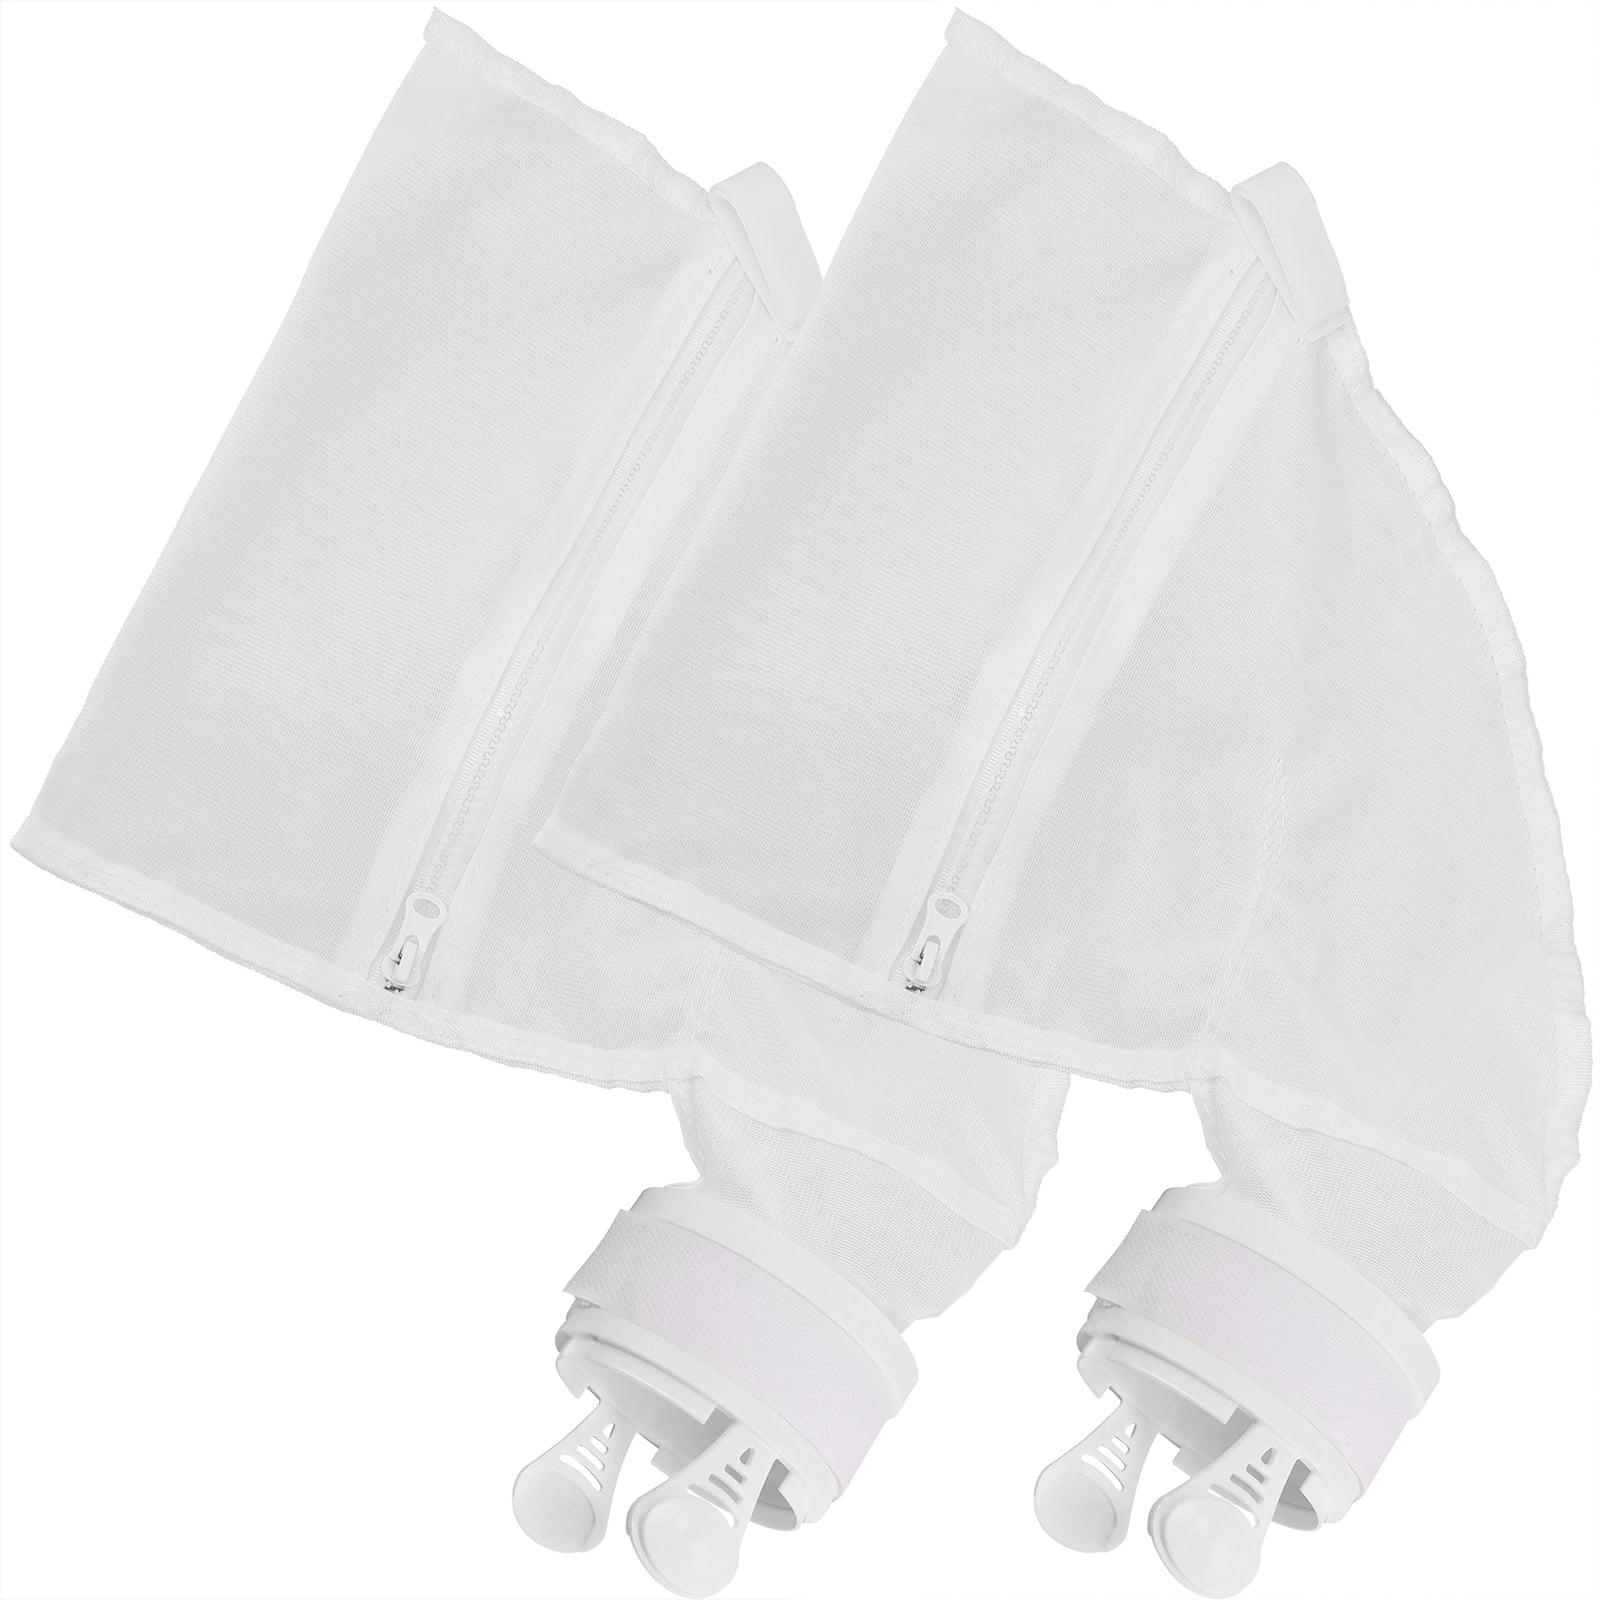 2 Pack Pool Cleaner All Purpose K16 Bag Fits for Polaris 280 480 Pool Cleaner All Purpose